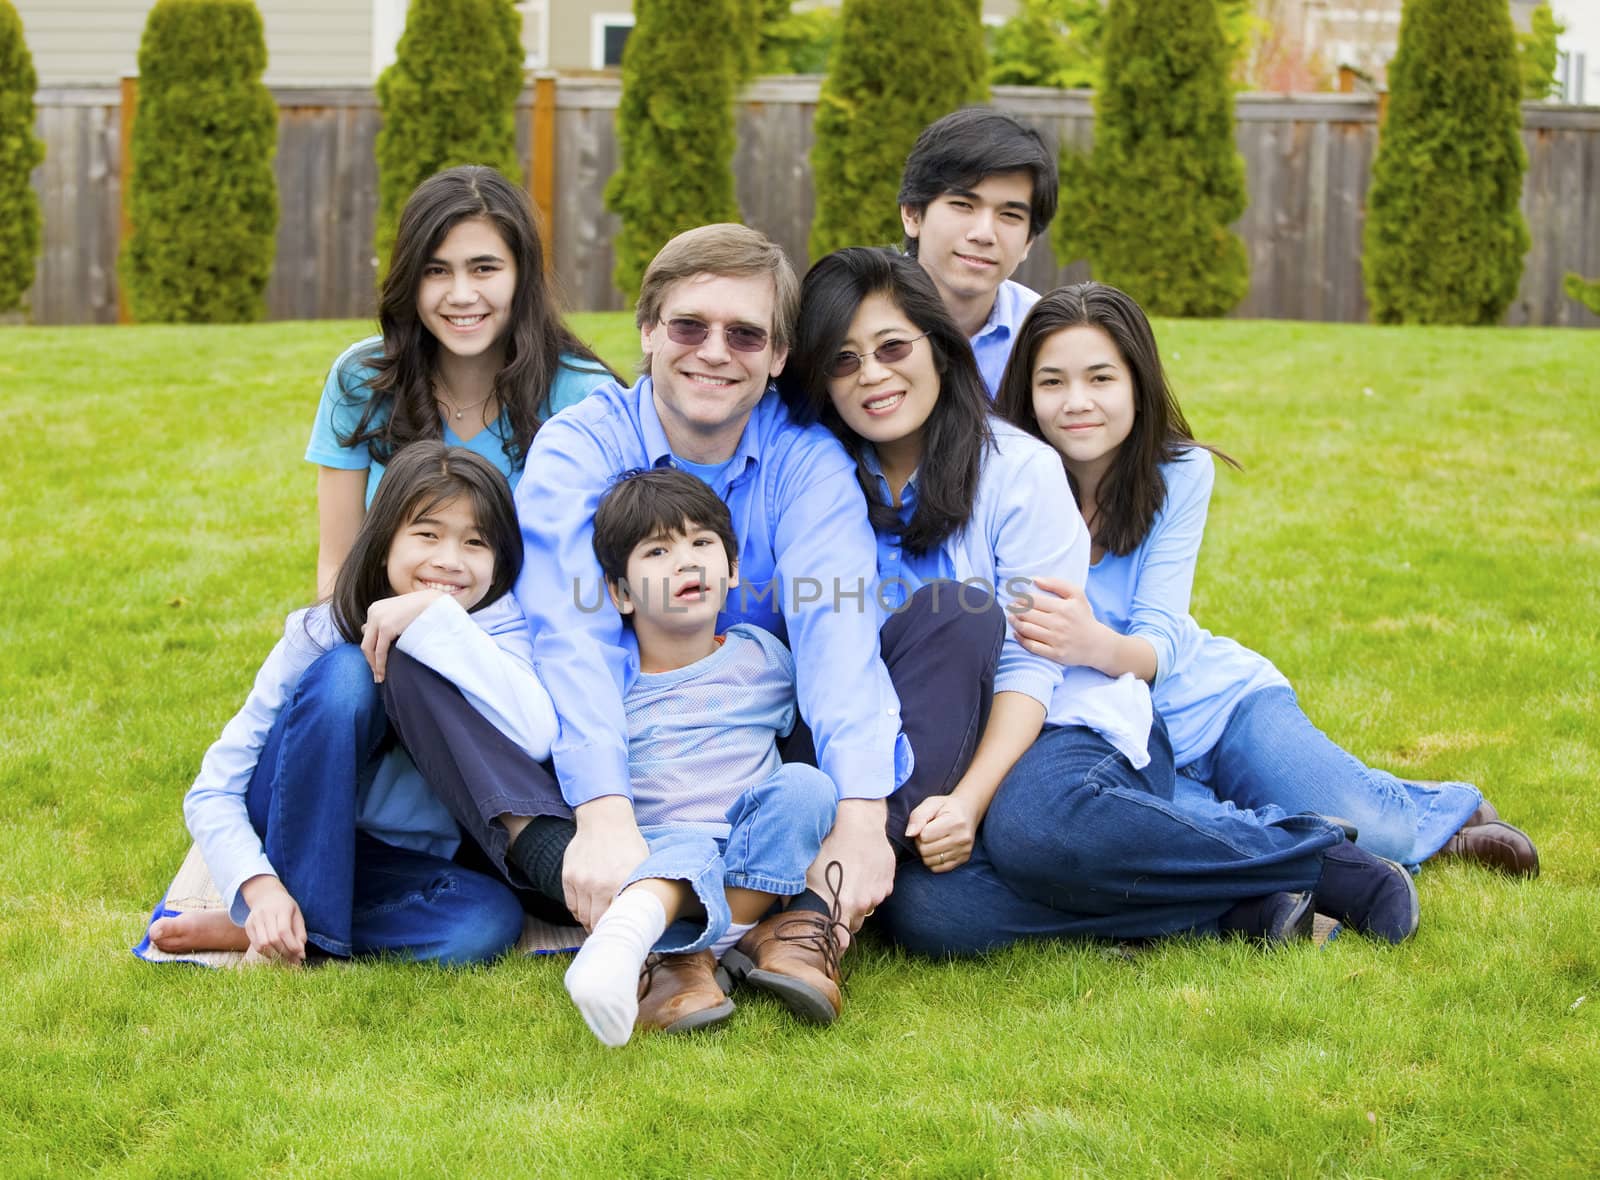 Large multiracial family of seven sitting together on lawn, dressed in blue colors. Five year old boy in front is disabled with cerebral palsy.